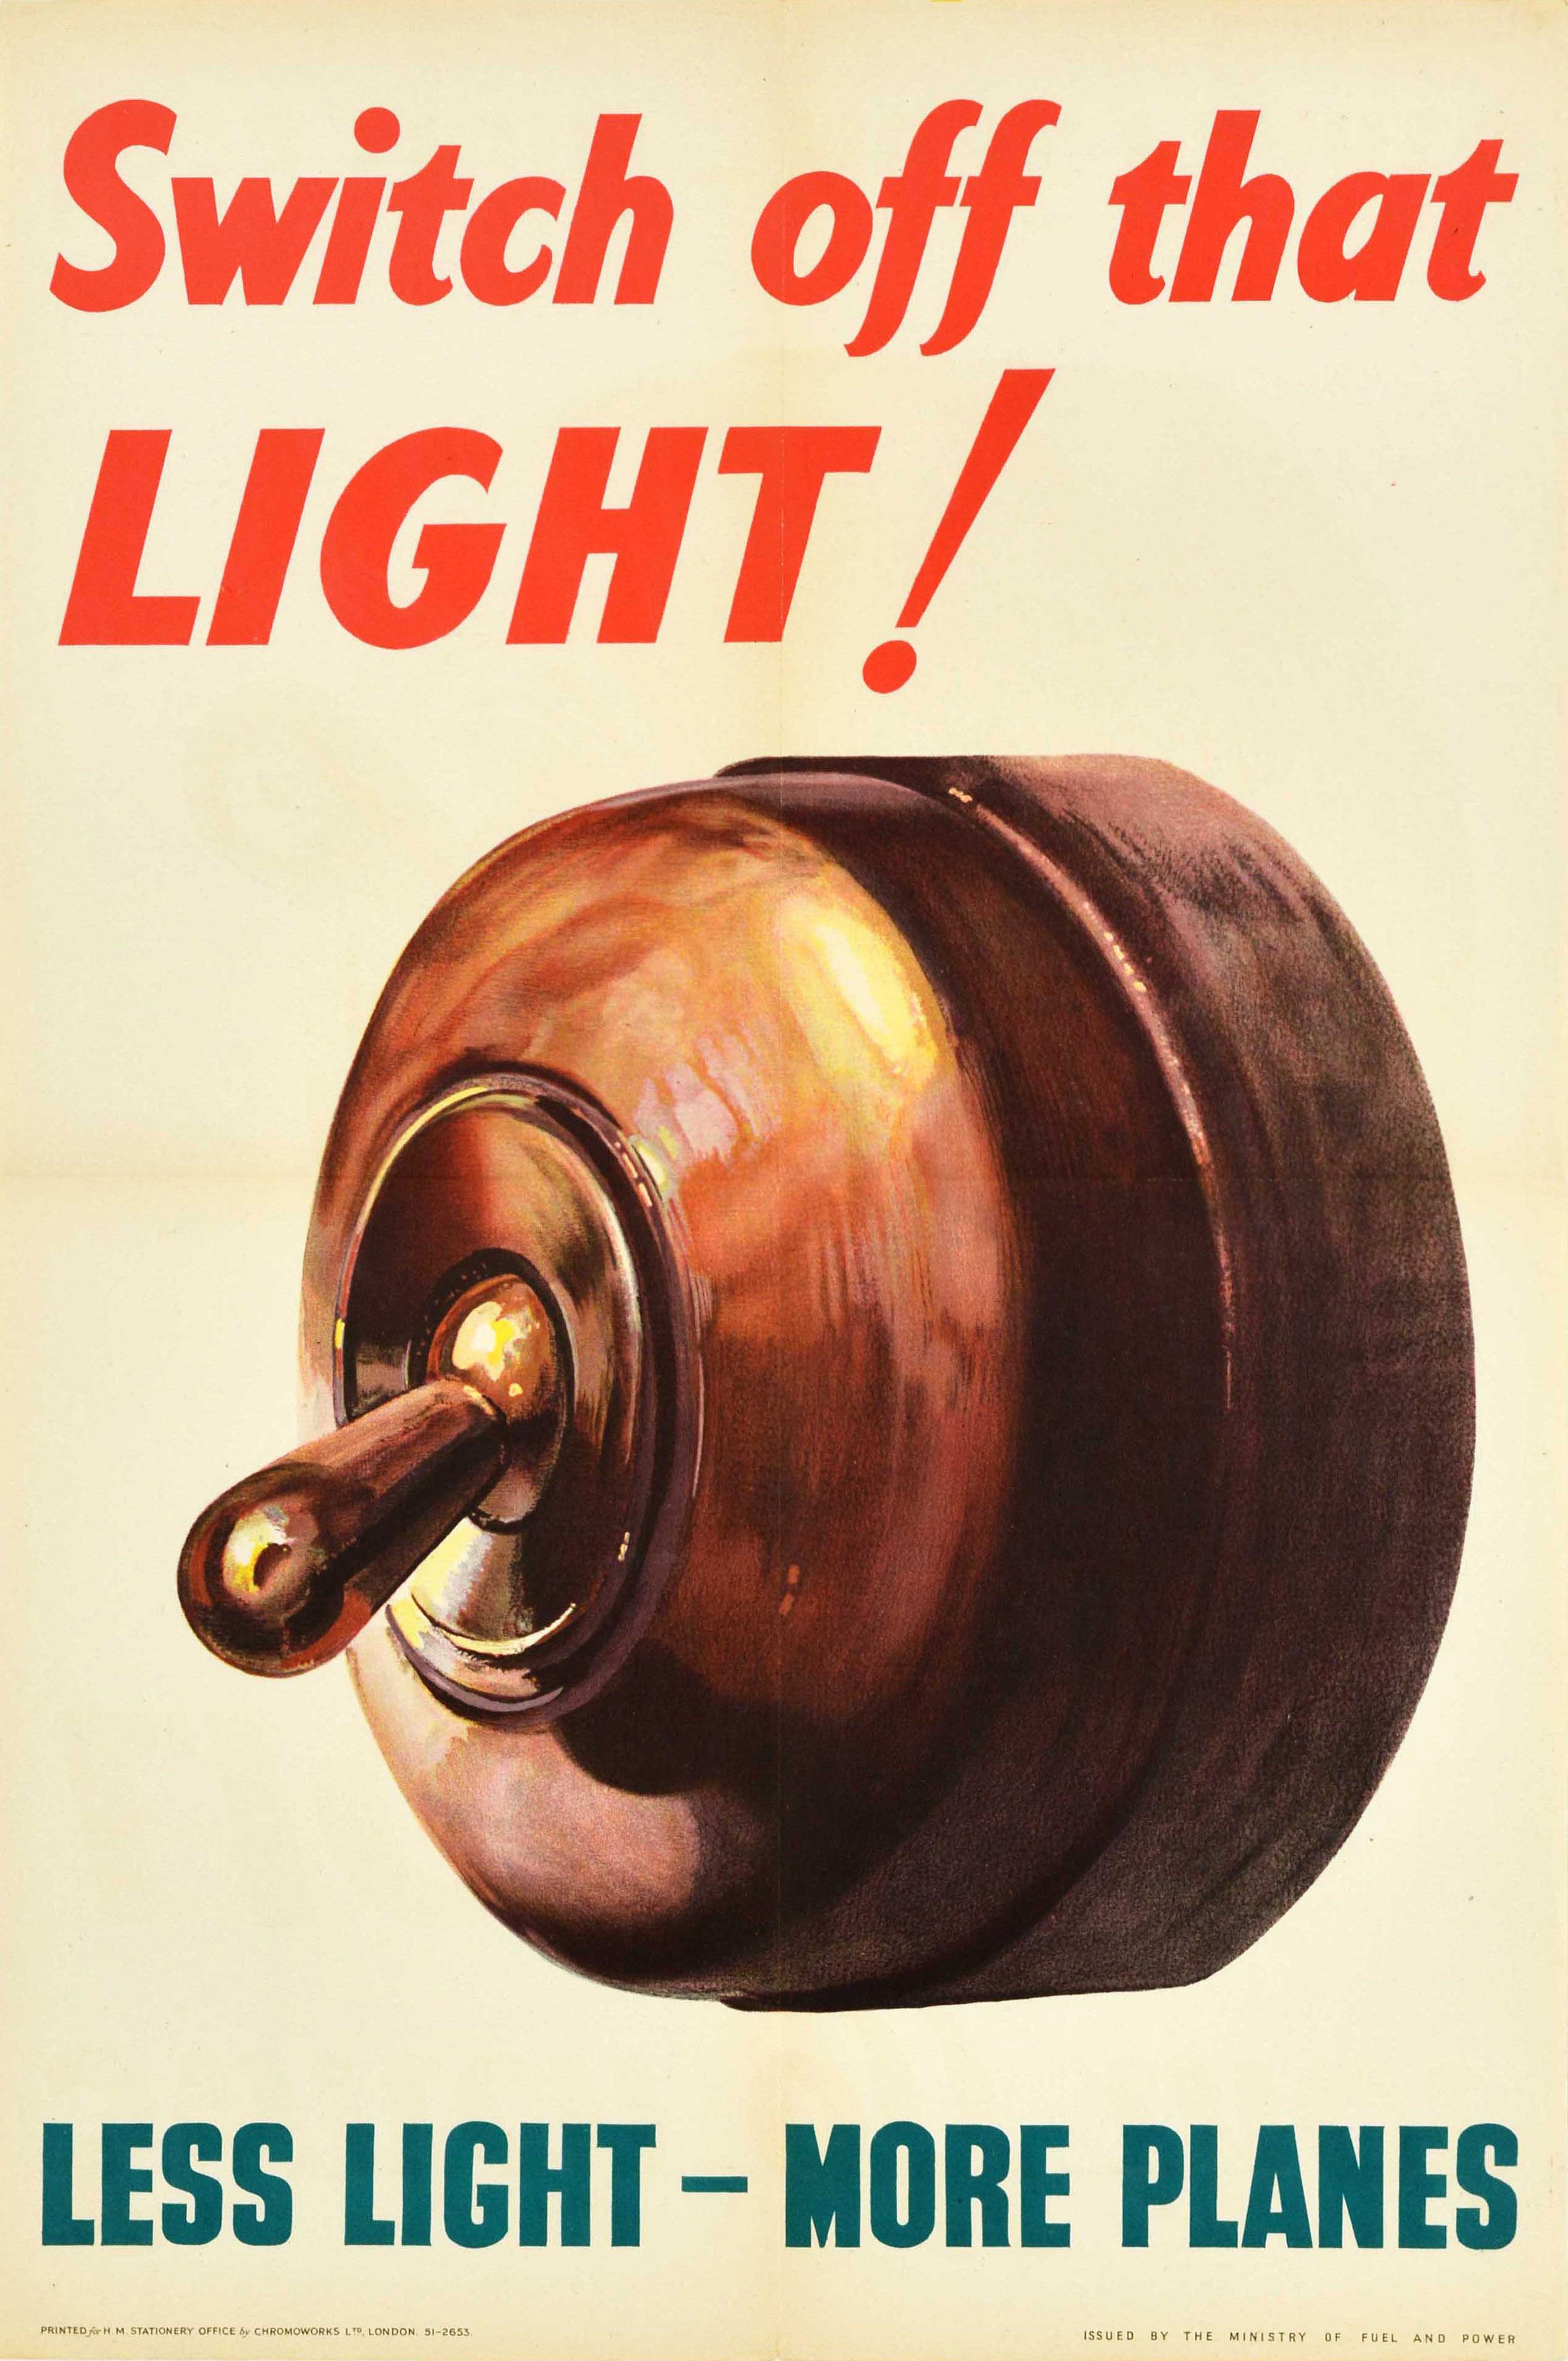 Unknown Print - Original Vintage WWII Poster Switch Off That Light More Planes Home Front Saving